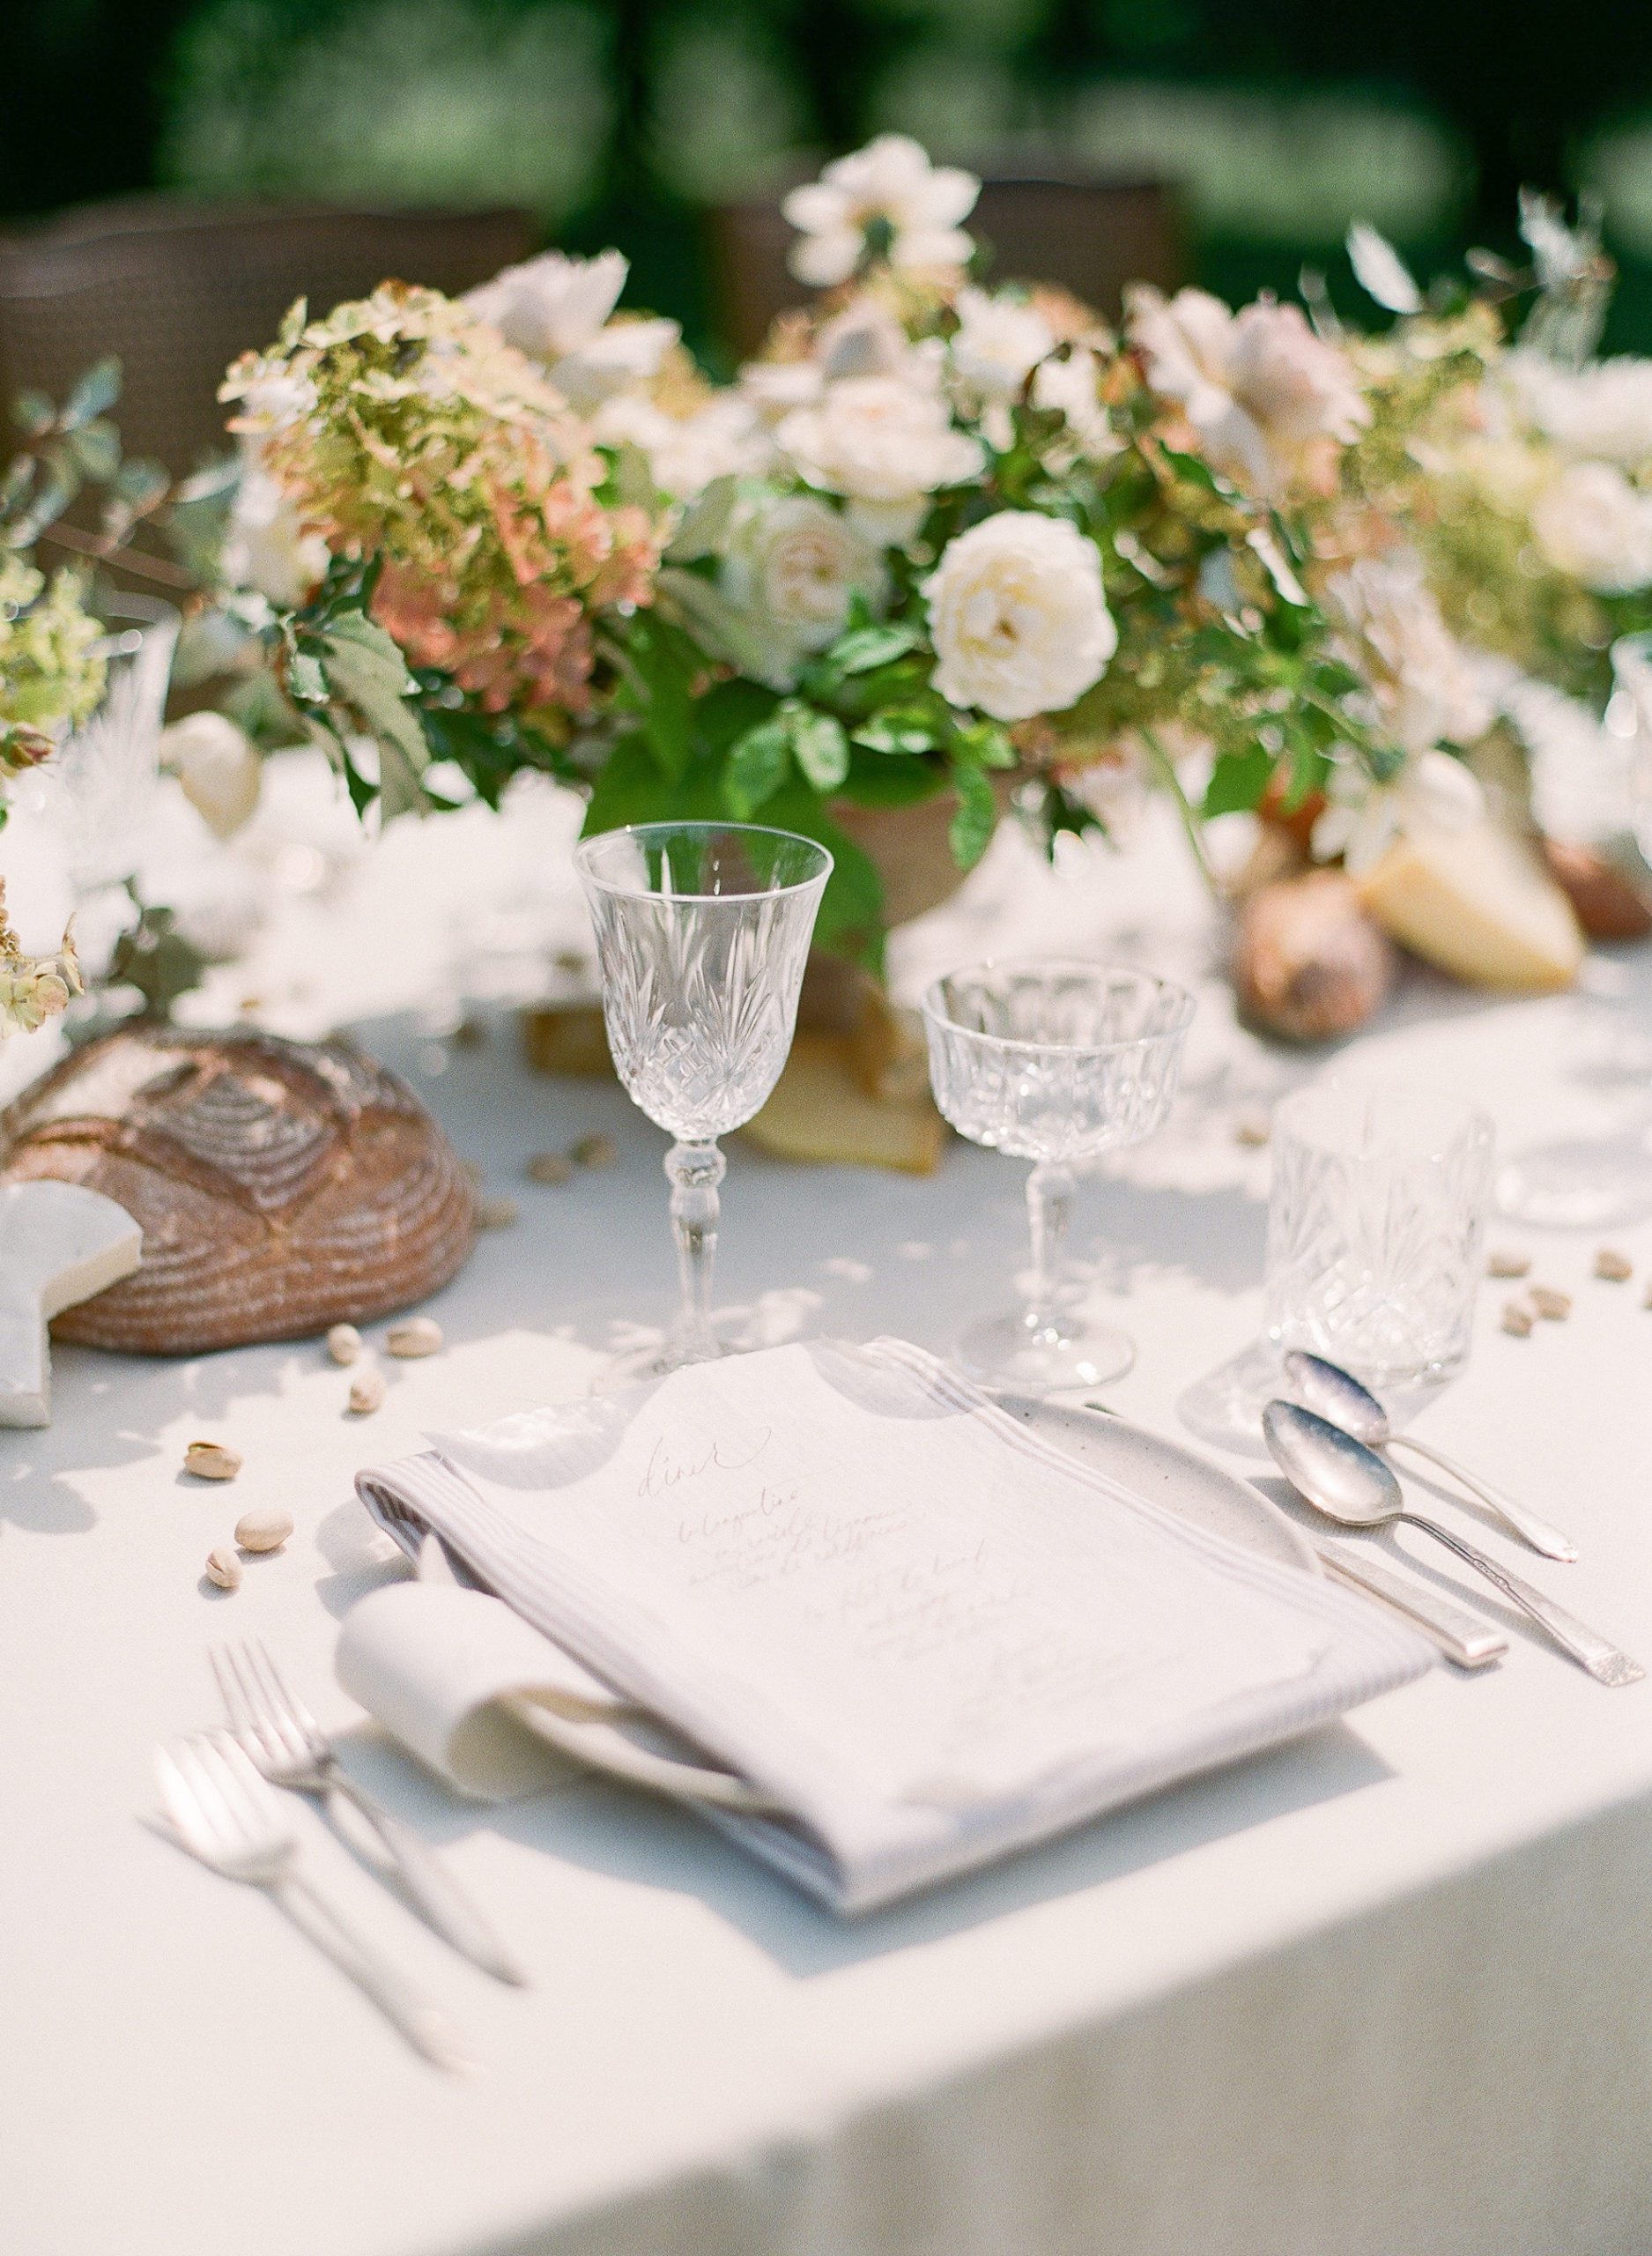 Wedding Reception Table Place setting with flower centerpieces and bread loafs photo